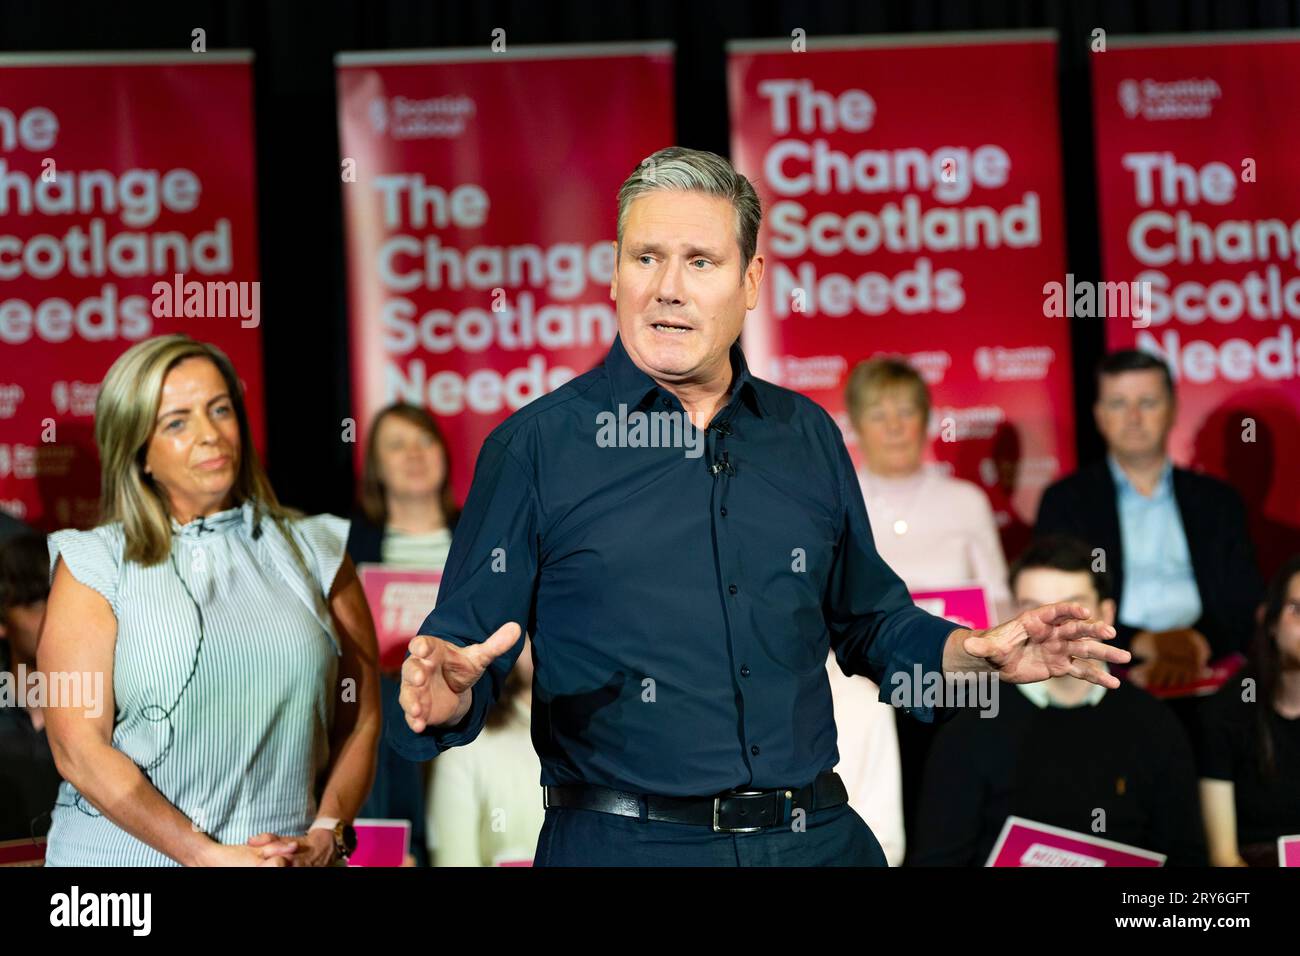 Hamilton, Scotland, UK. 29th September 2023.  Leader of the Labour Party, Sir Keir Starmer, joined Anas Sarwar, Michael Shanks and Jackie Baillie for a Scottish Labour rally ahead of the Rutherglen and Hamilton West by-election next week. The Scottish Labour Party is hoping to take the seat from the SNP.  Pic; Sir Keir Starmer. Iain Masterton/Alamy Live News Stock Photo